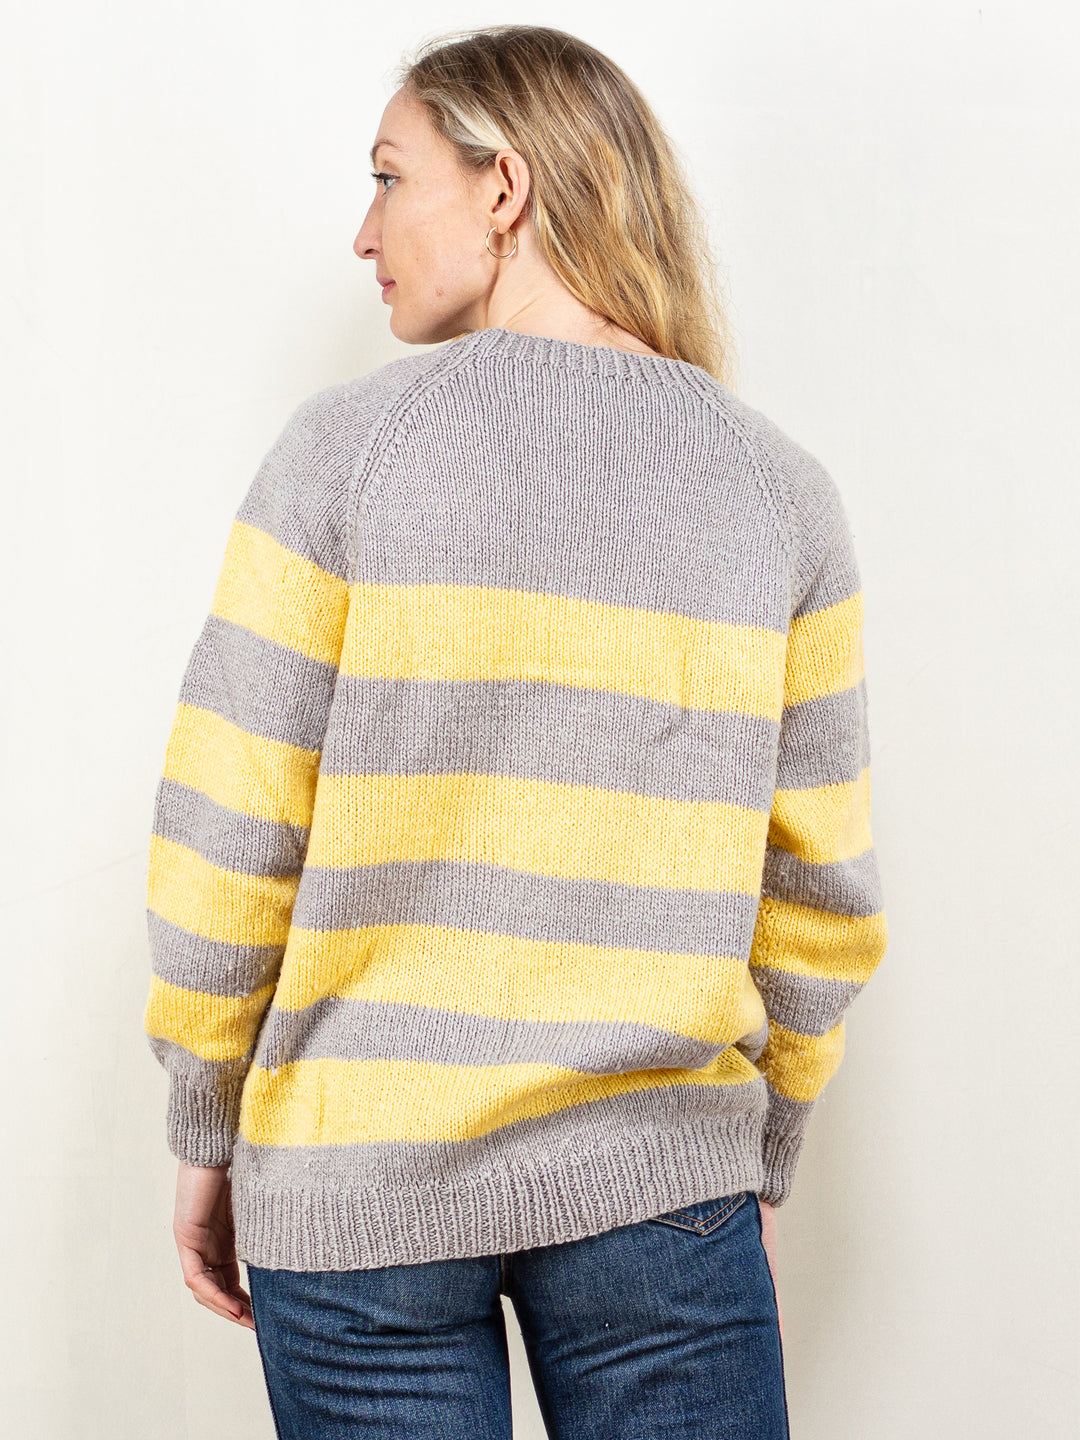 Hand Knit Sweater vintage 90's chunky knit grey yellow raglan sleeve sweater stripe knit jumper winter pullover women clothing size large